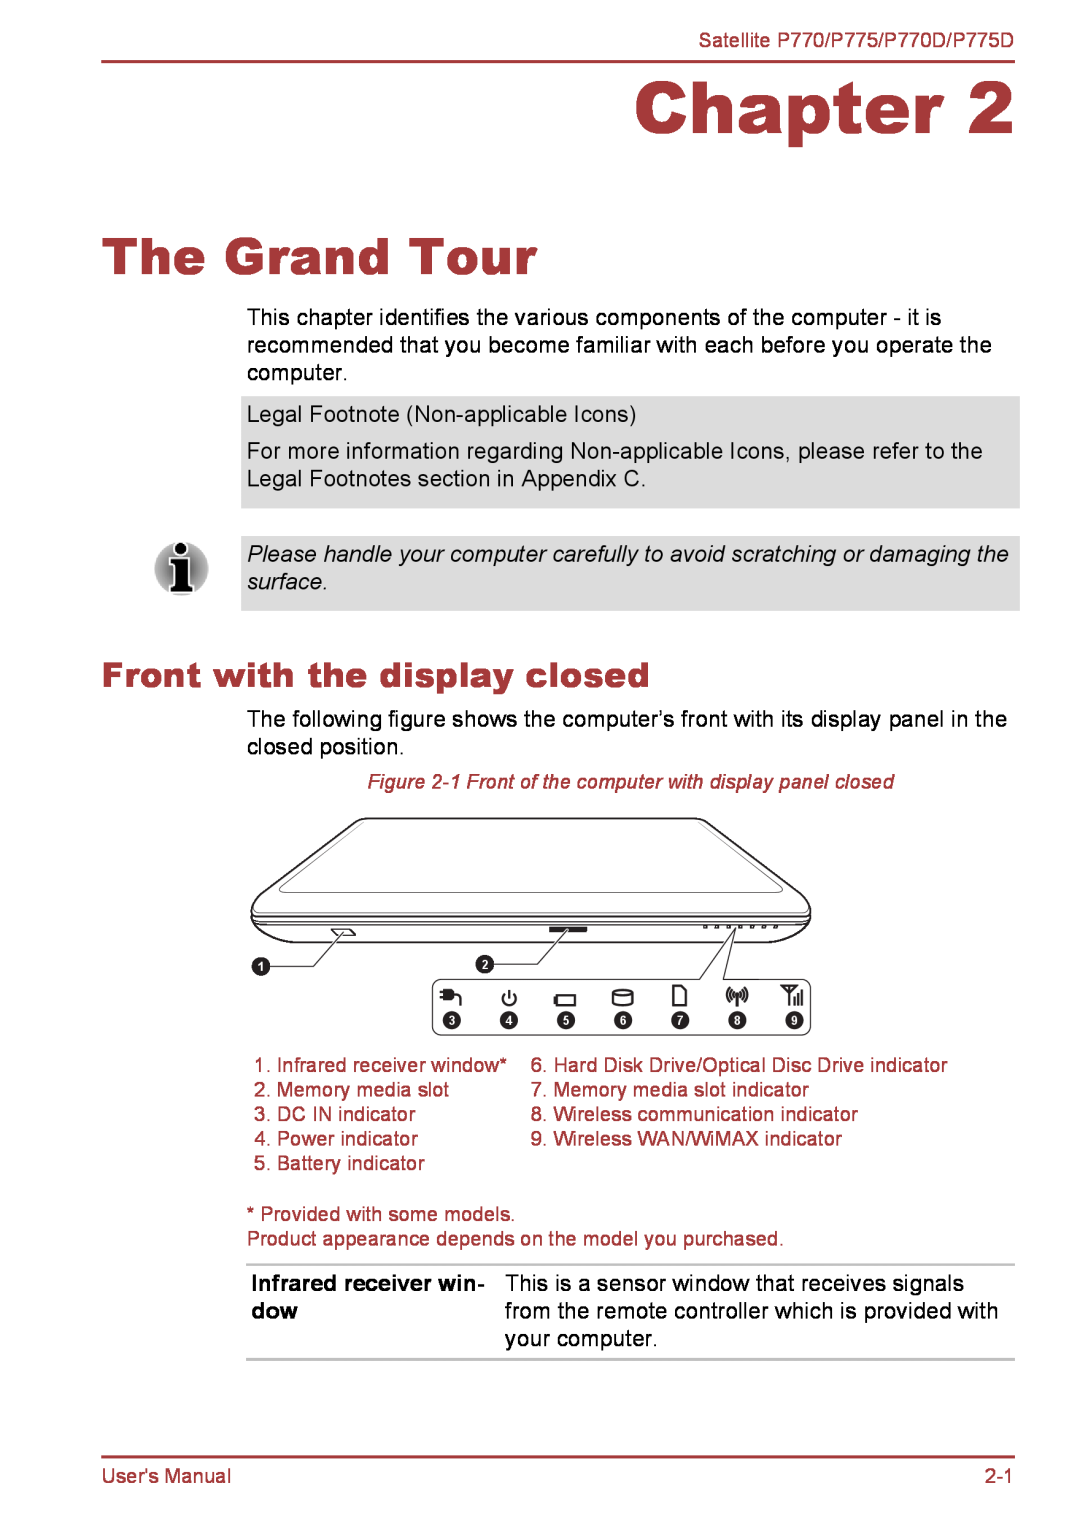 Toshiba P770 user manual The Grand Tour, Front with the display closed, Chapter 